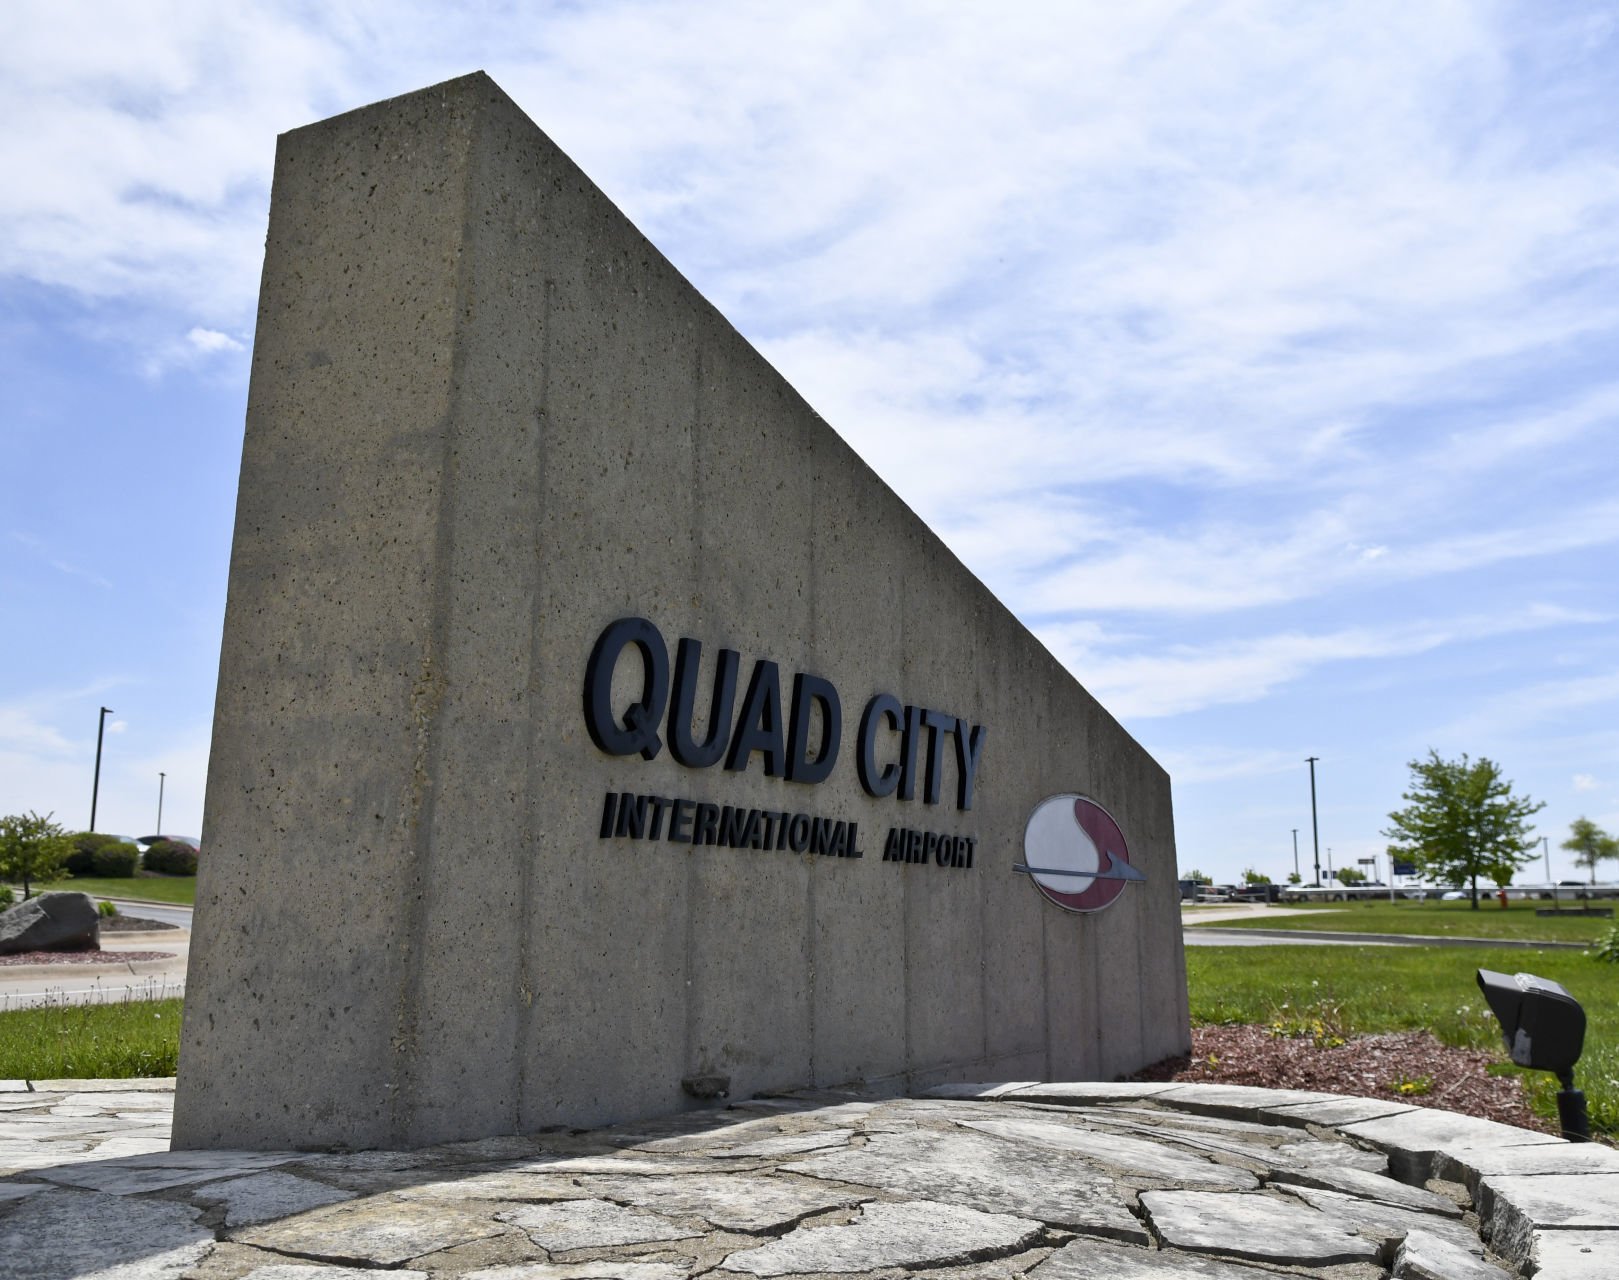 how far away is quad city airport from house sprungs missouri